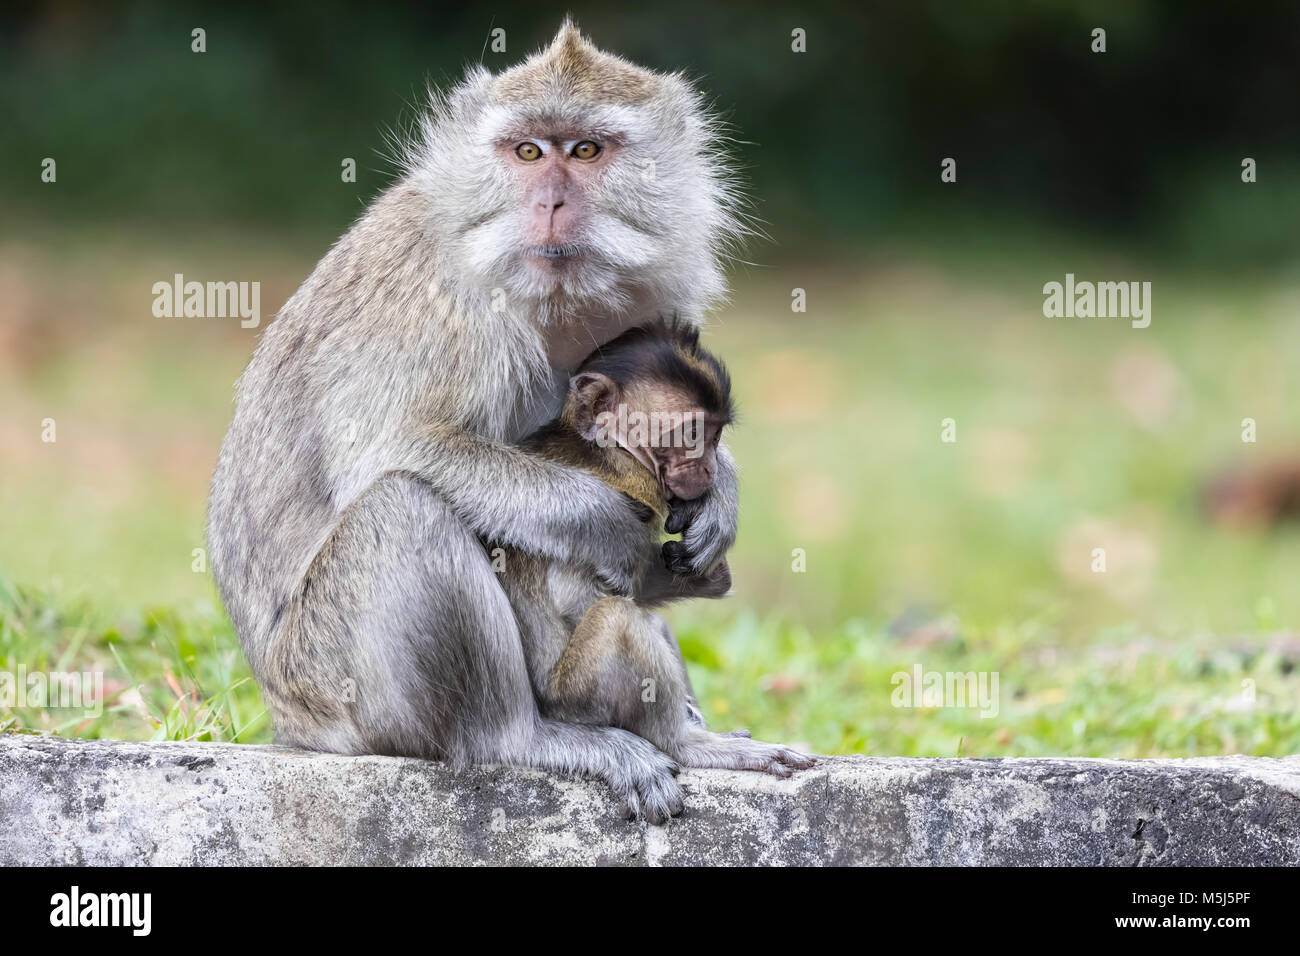 Mauritius, Black River Gorges National Park, long-tailed macaque, long-tailed macaques, mother with young animal Stock Photo